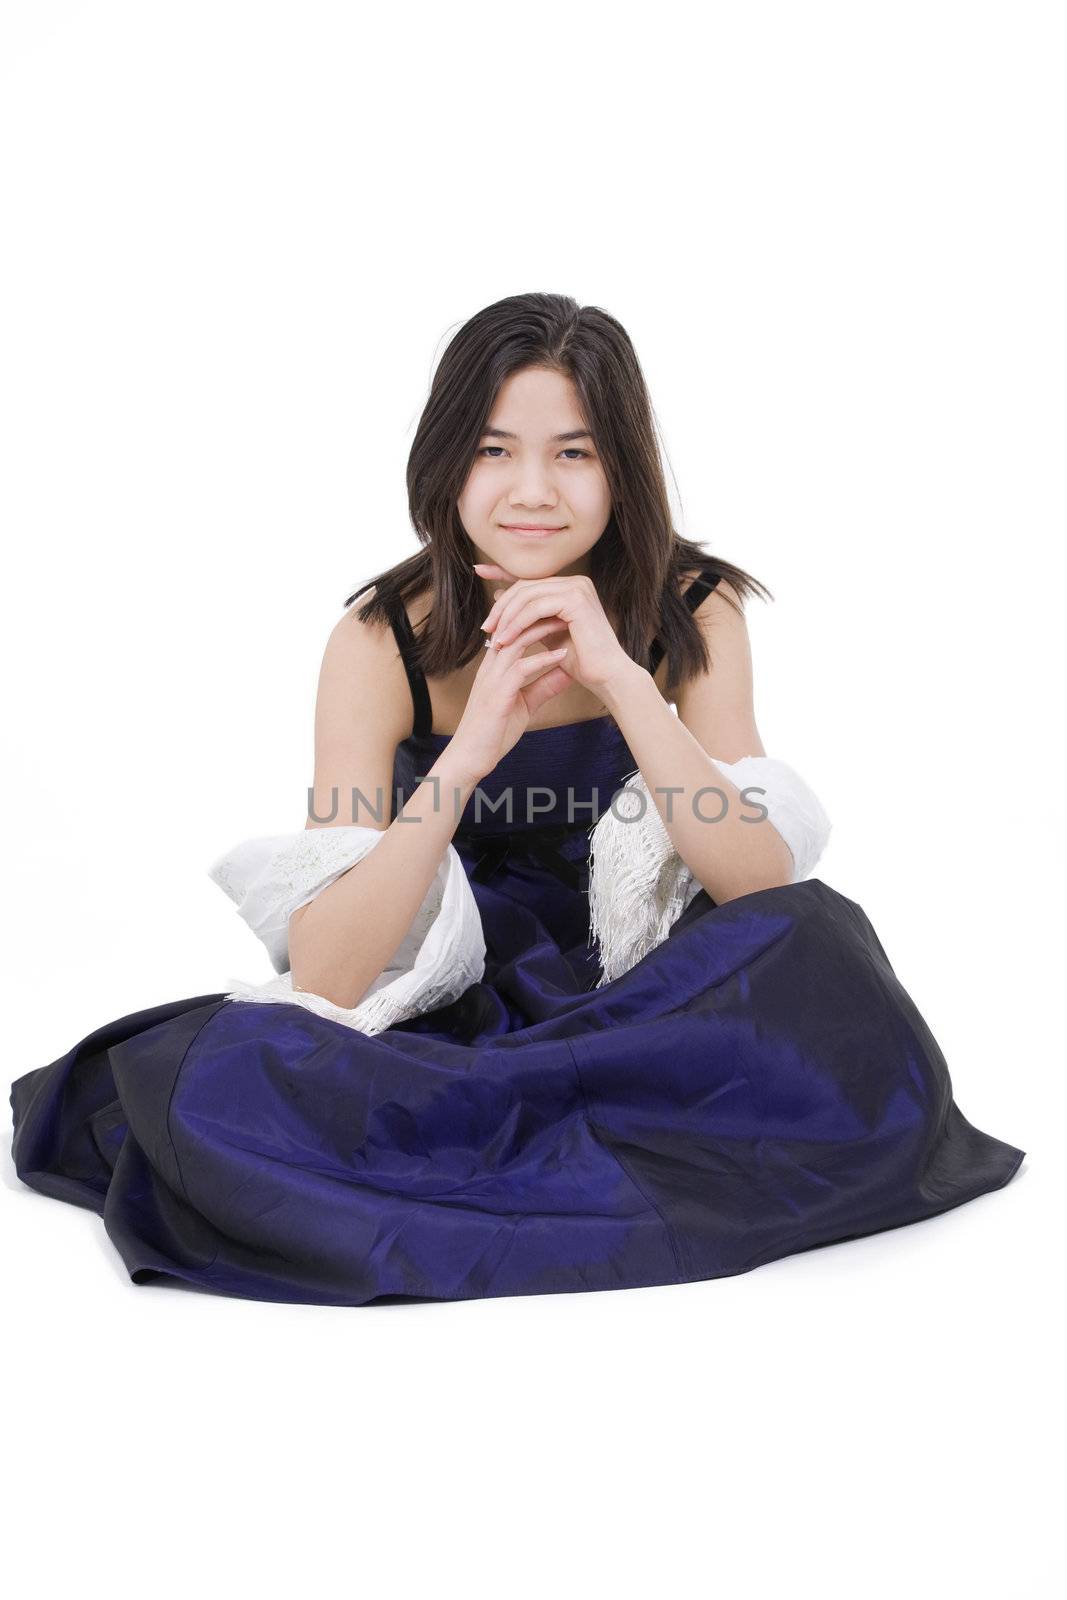 Young teen girl in dark blue dress gown isolated on white by jarenwicklund